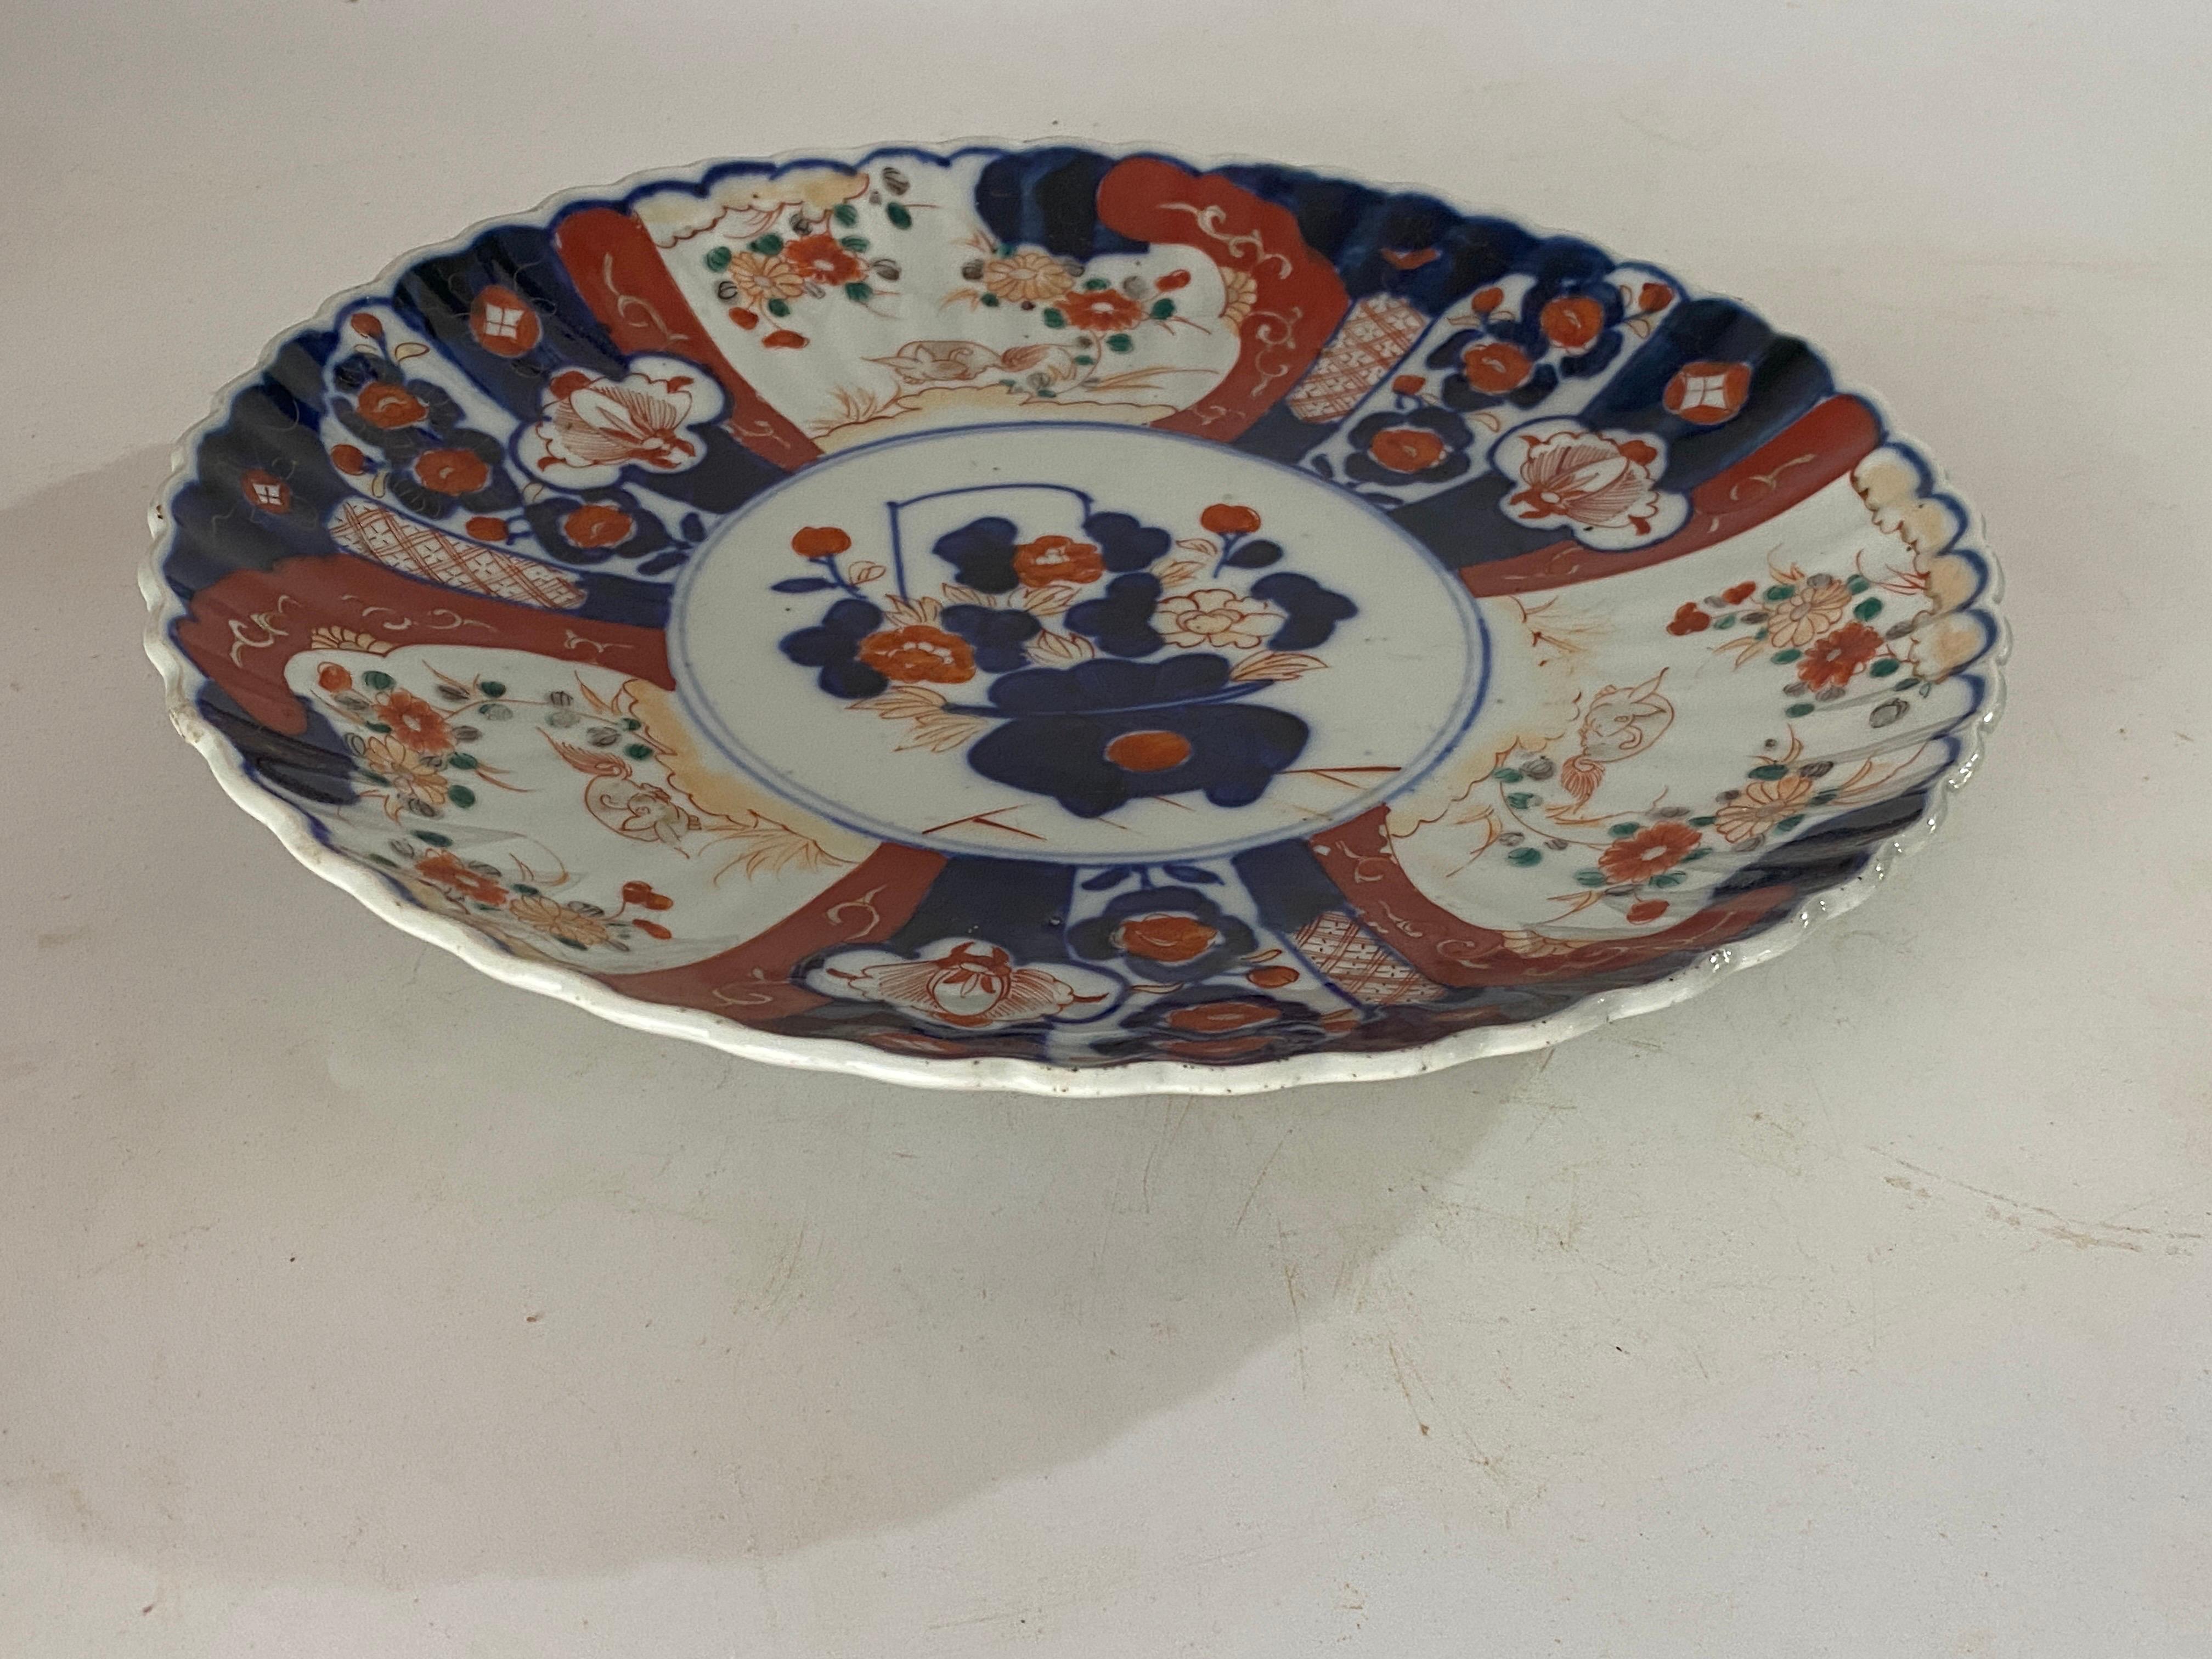 Japanese 19th Century Scalloped Imari Porcelain Dish or Charger In Good Condition For Sale In Auribeau sur Siagne, FR